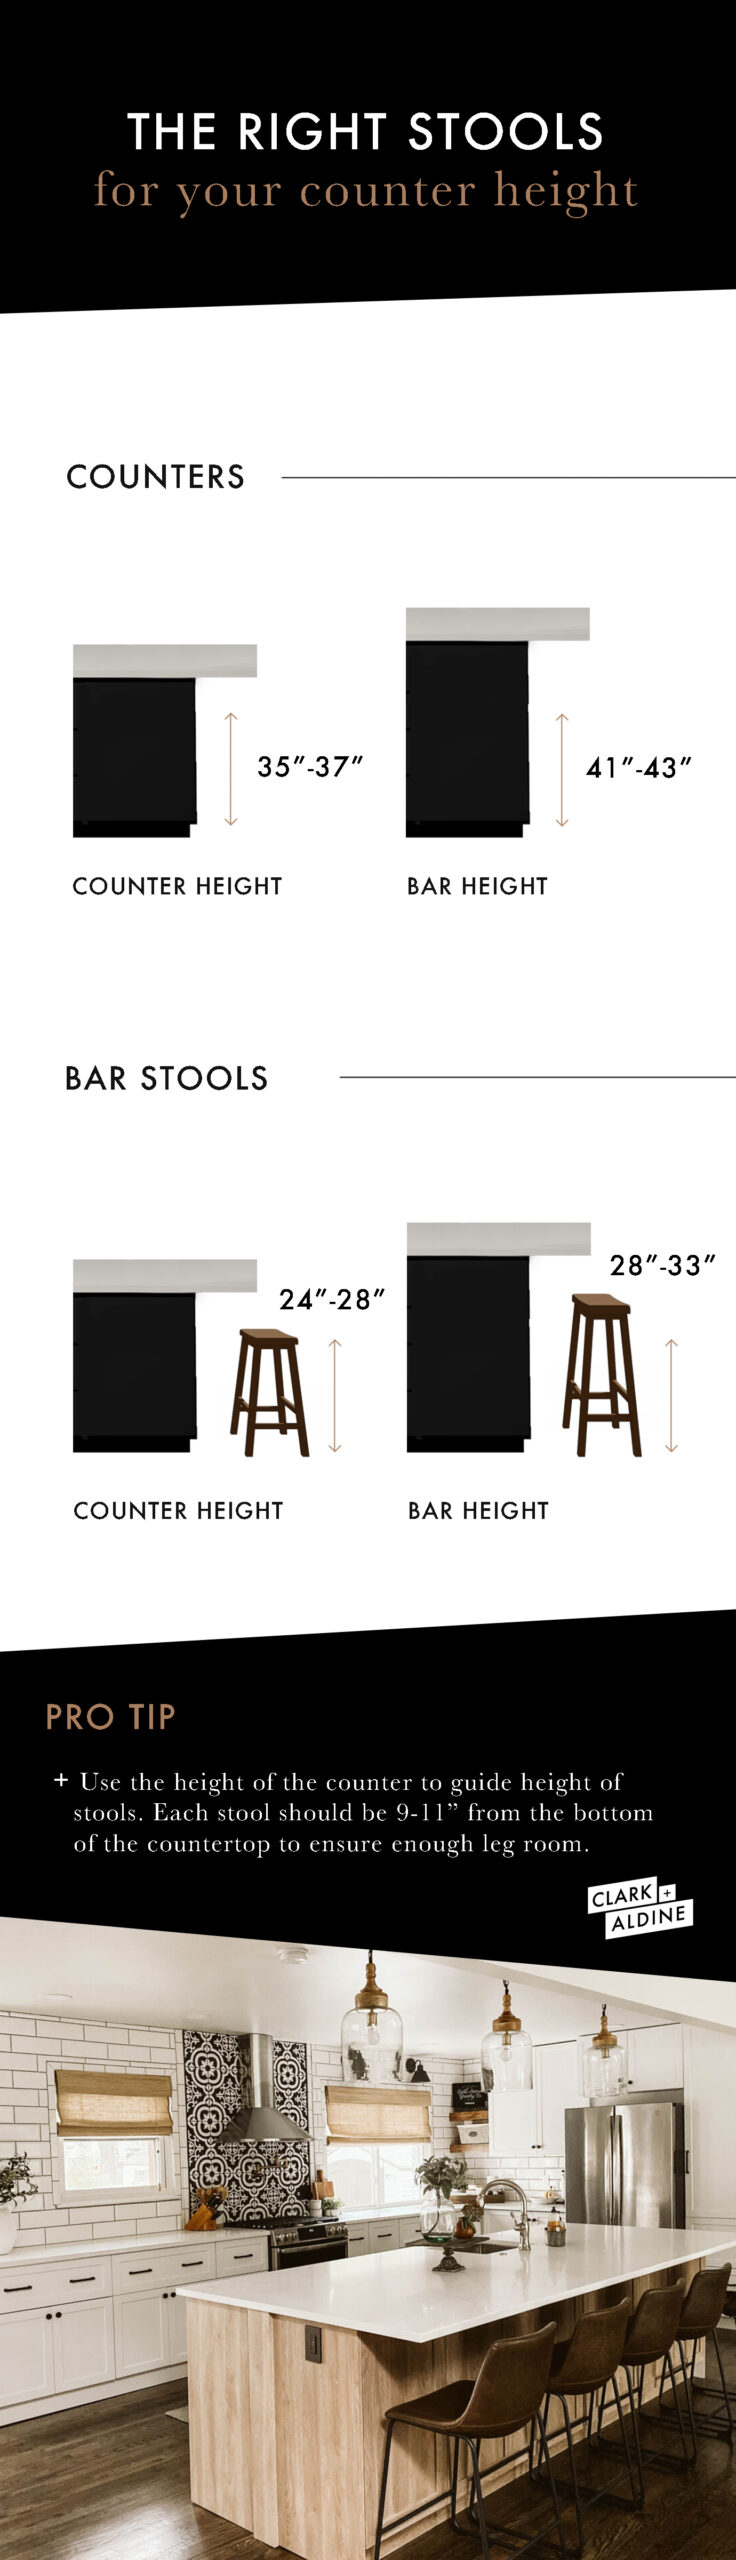 HOW TO FIND THE PERFECT KITCHEN ISLAND HEIGHT image 2